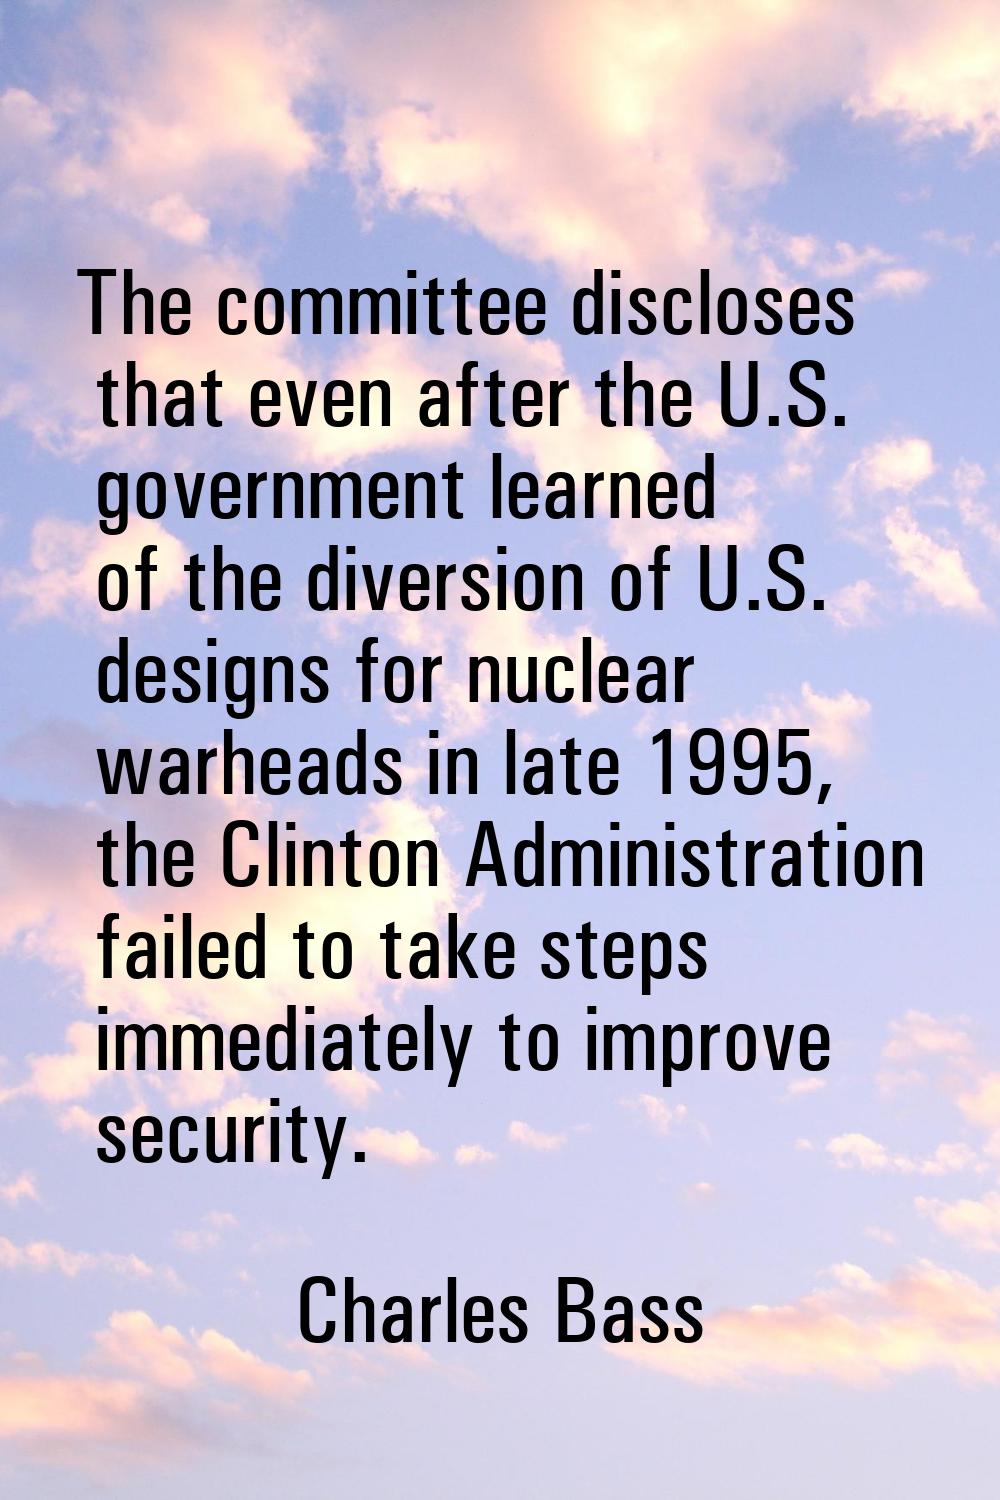 The committee discloses that even after the U.S. government learned of the diversion of U.S. design